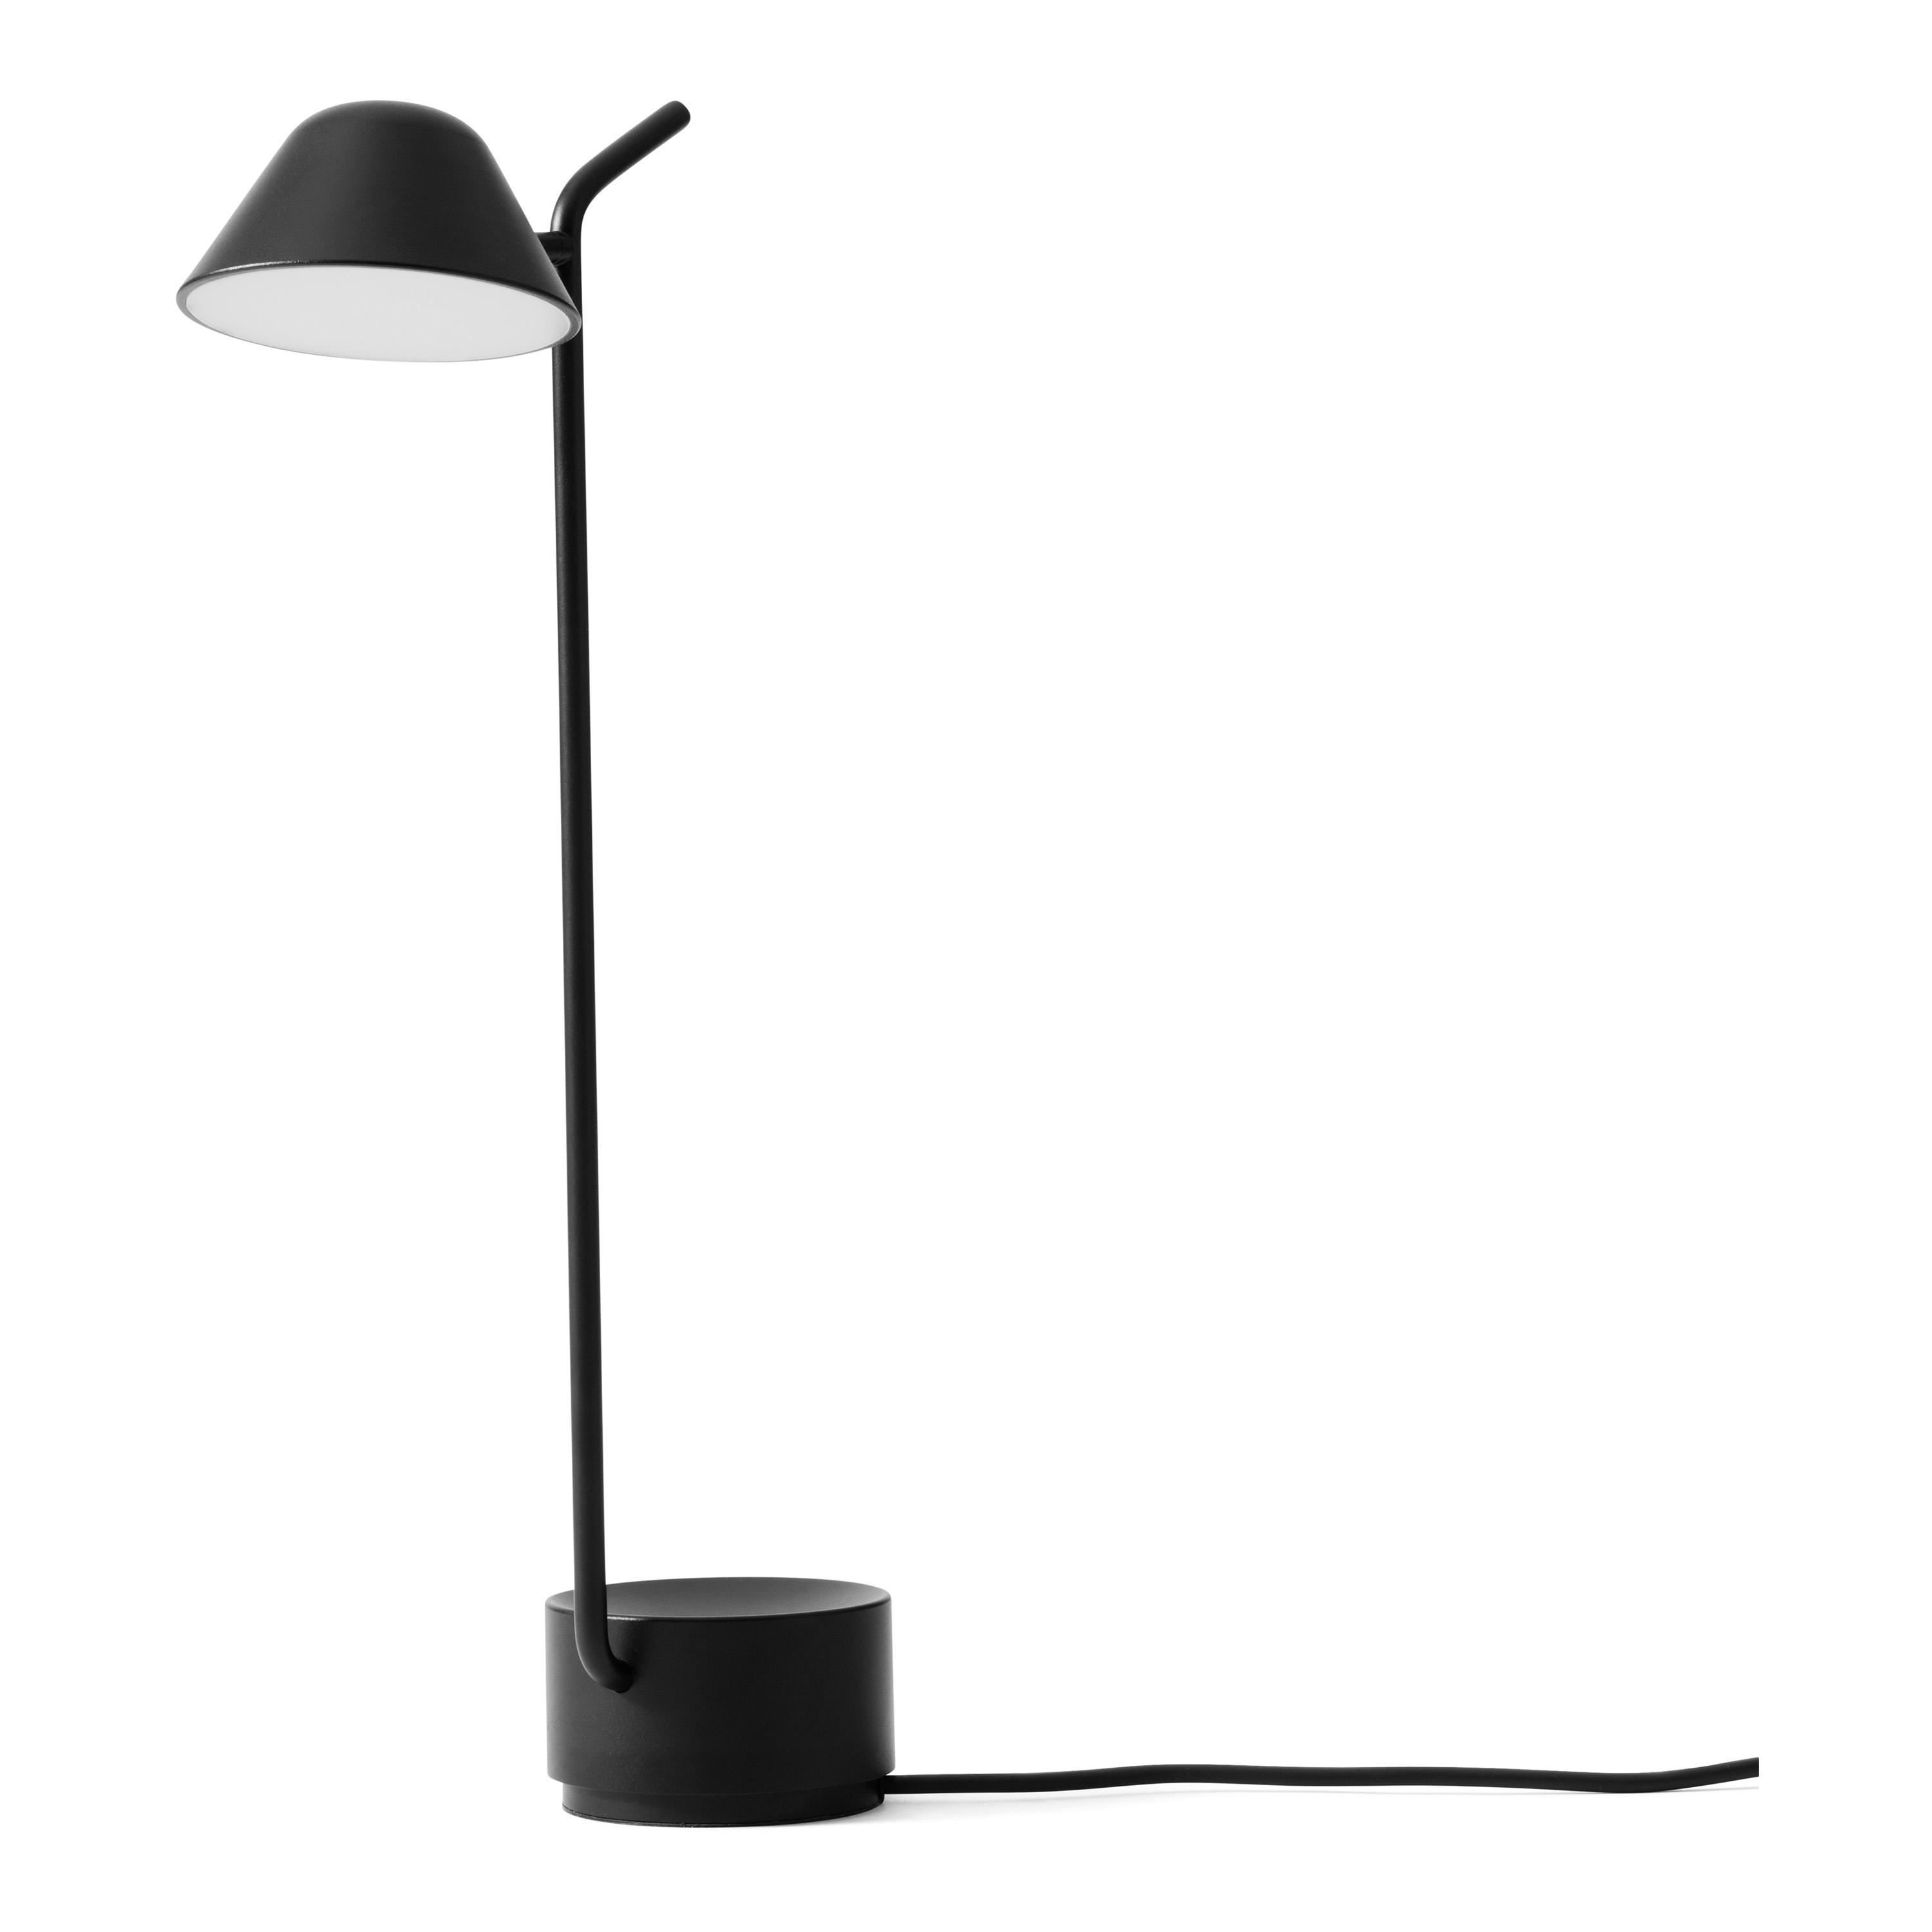 Best Table Lamp For Reading